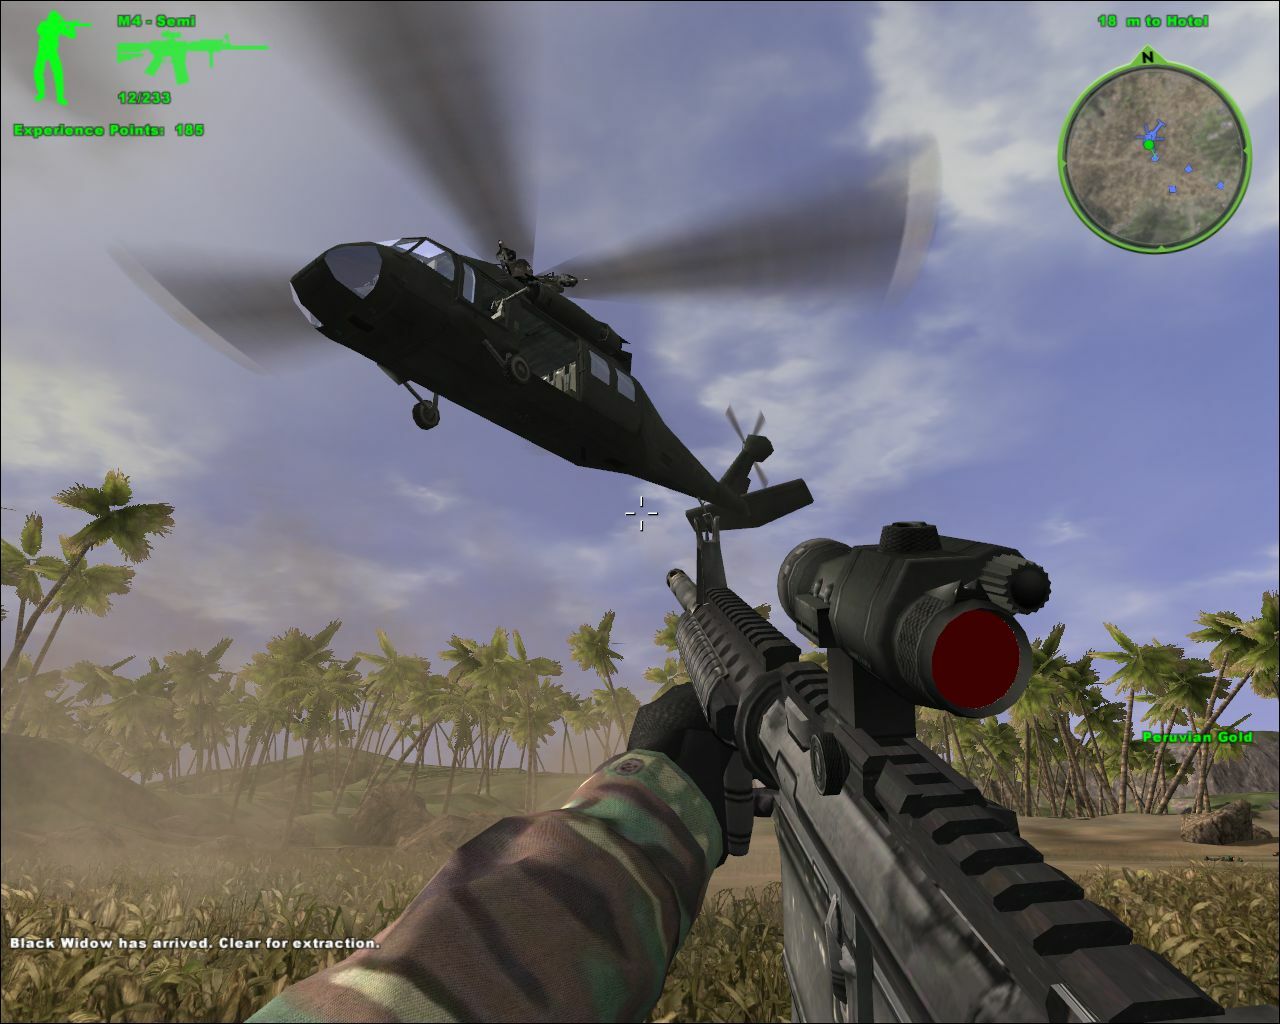 delta force xtreme free